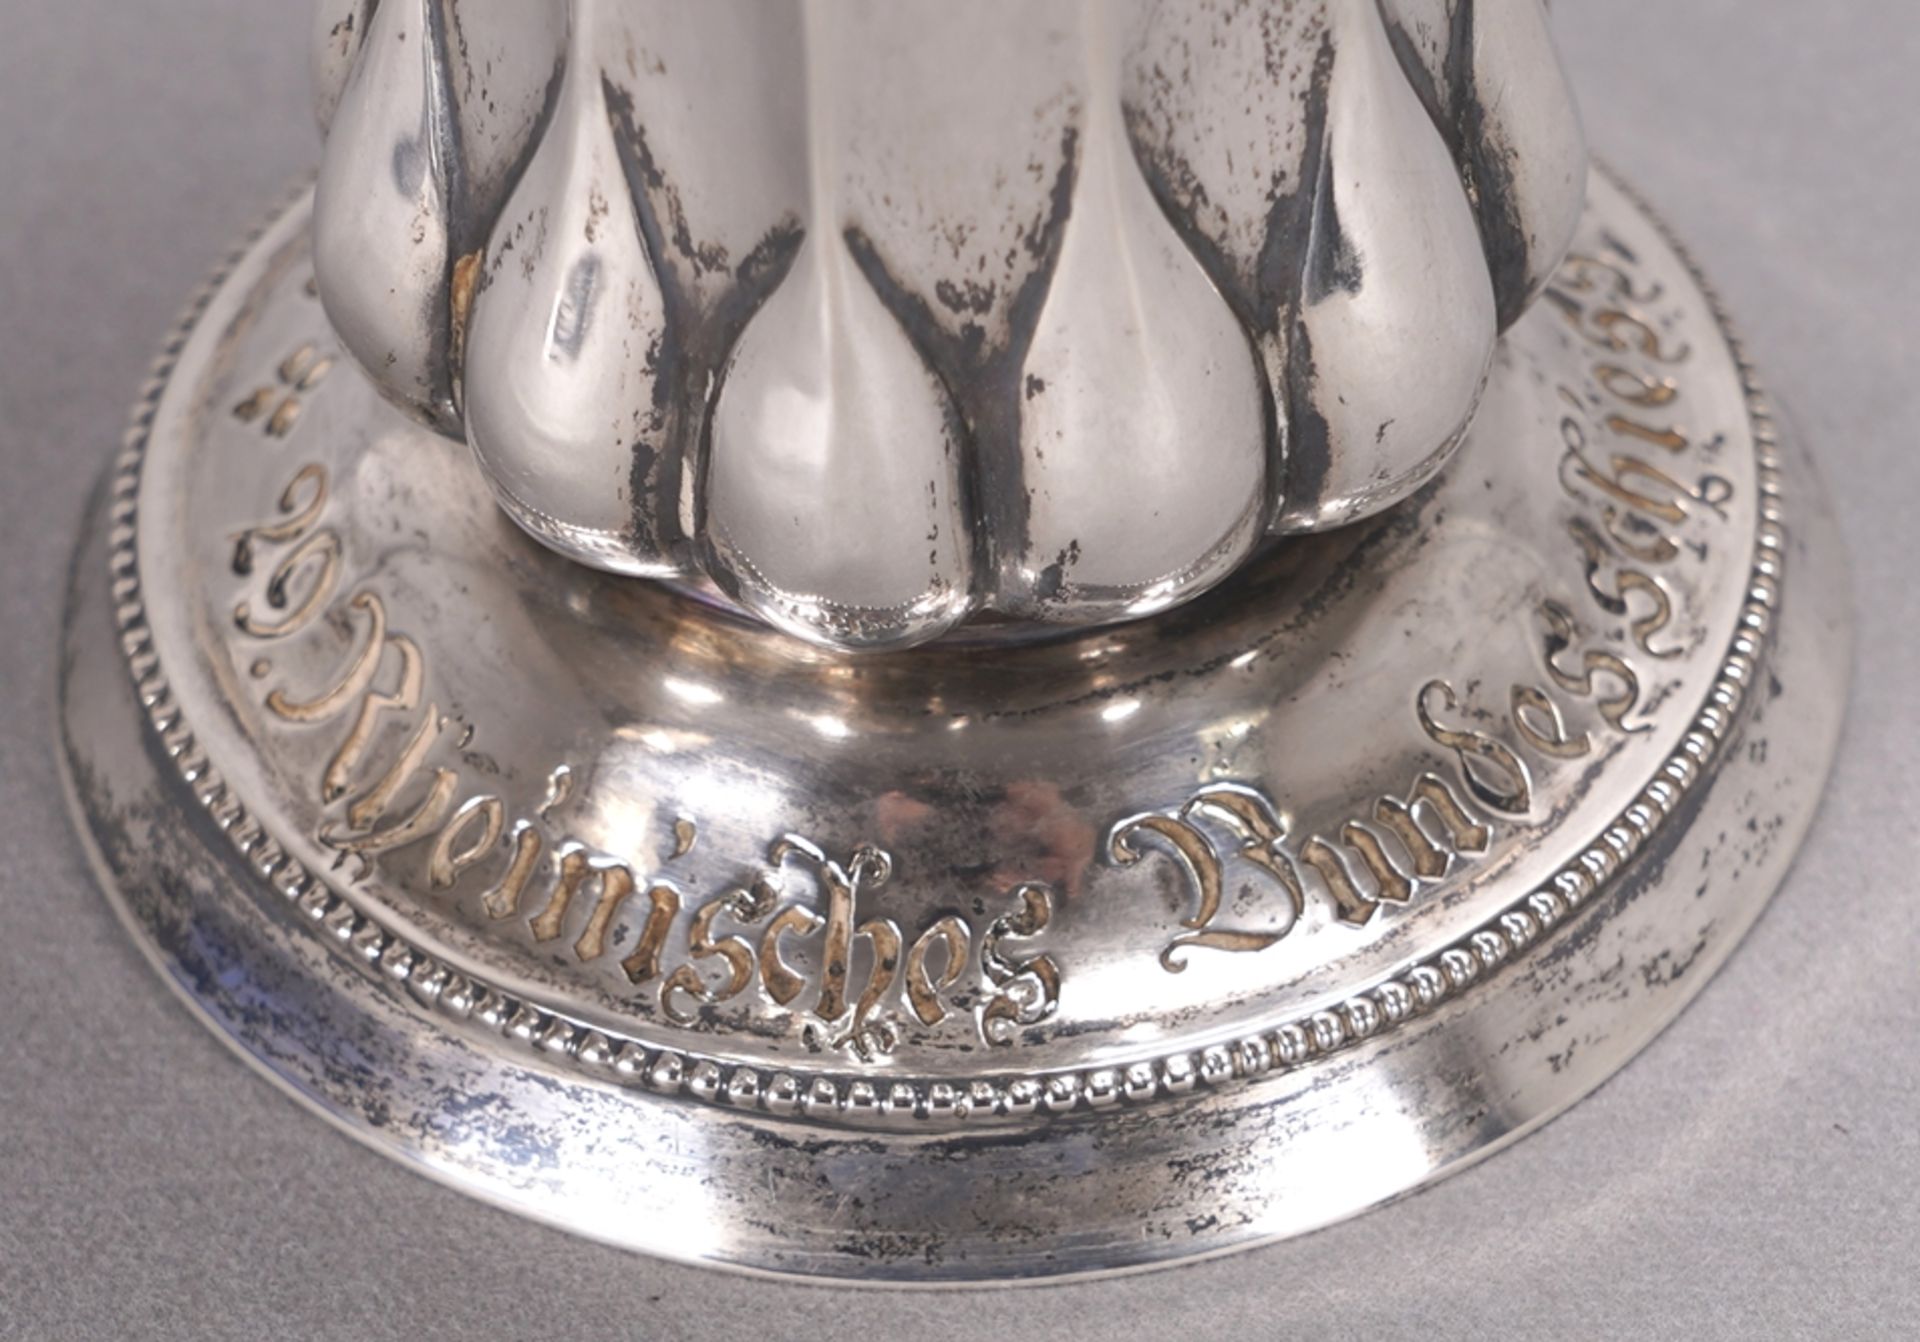 Rifleman's Cup - Image 3 of 6